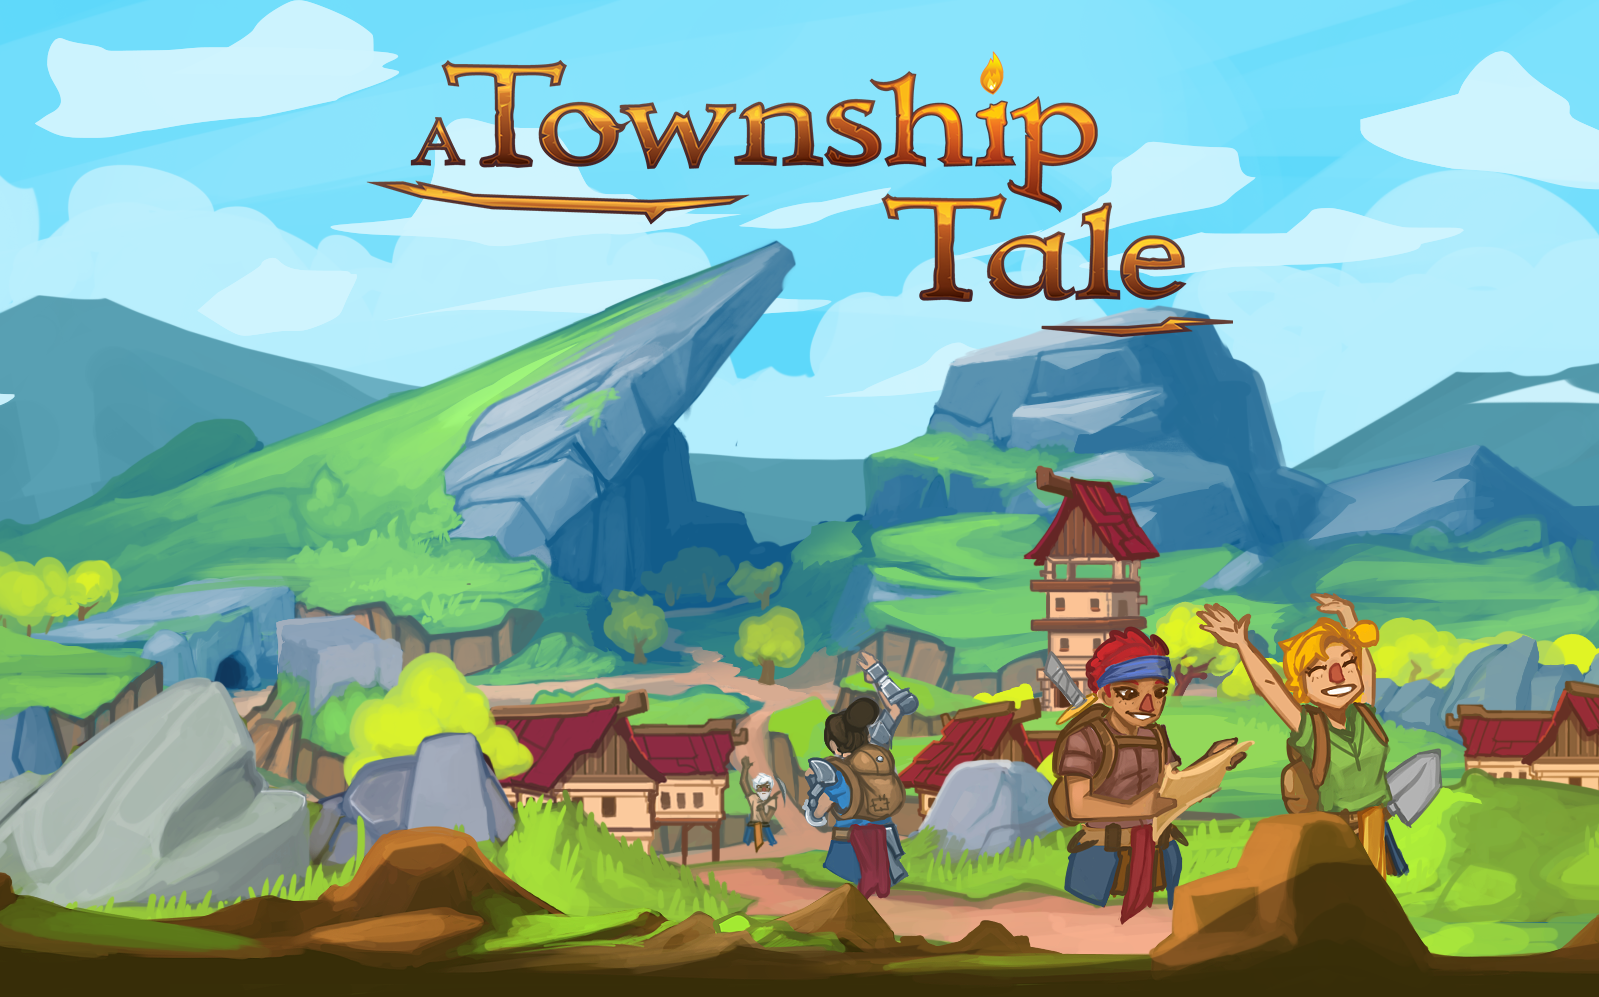 a township tale review